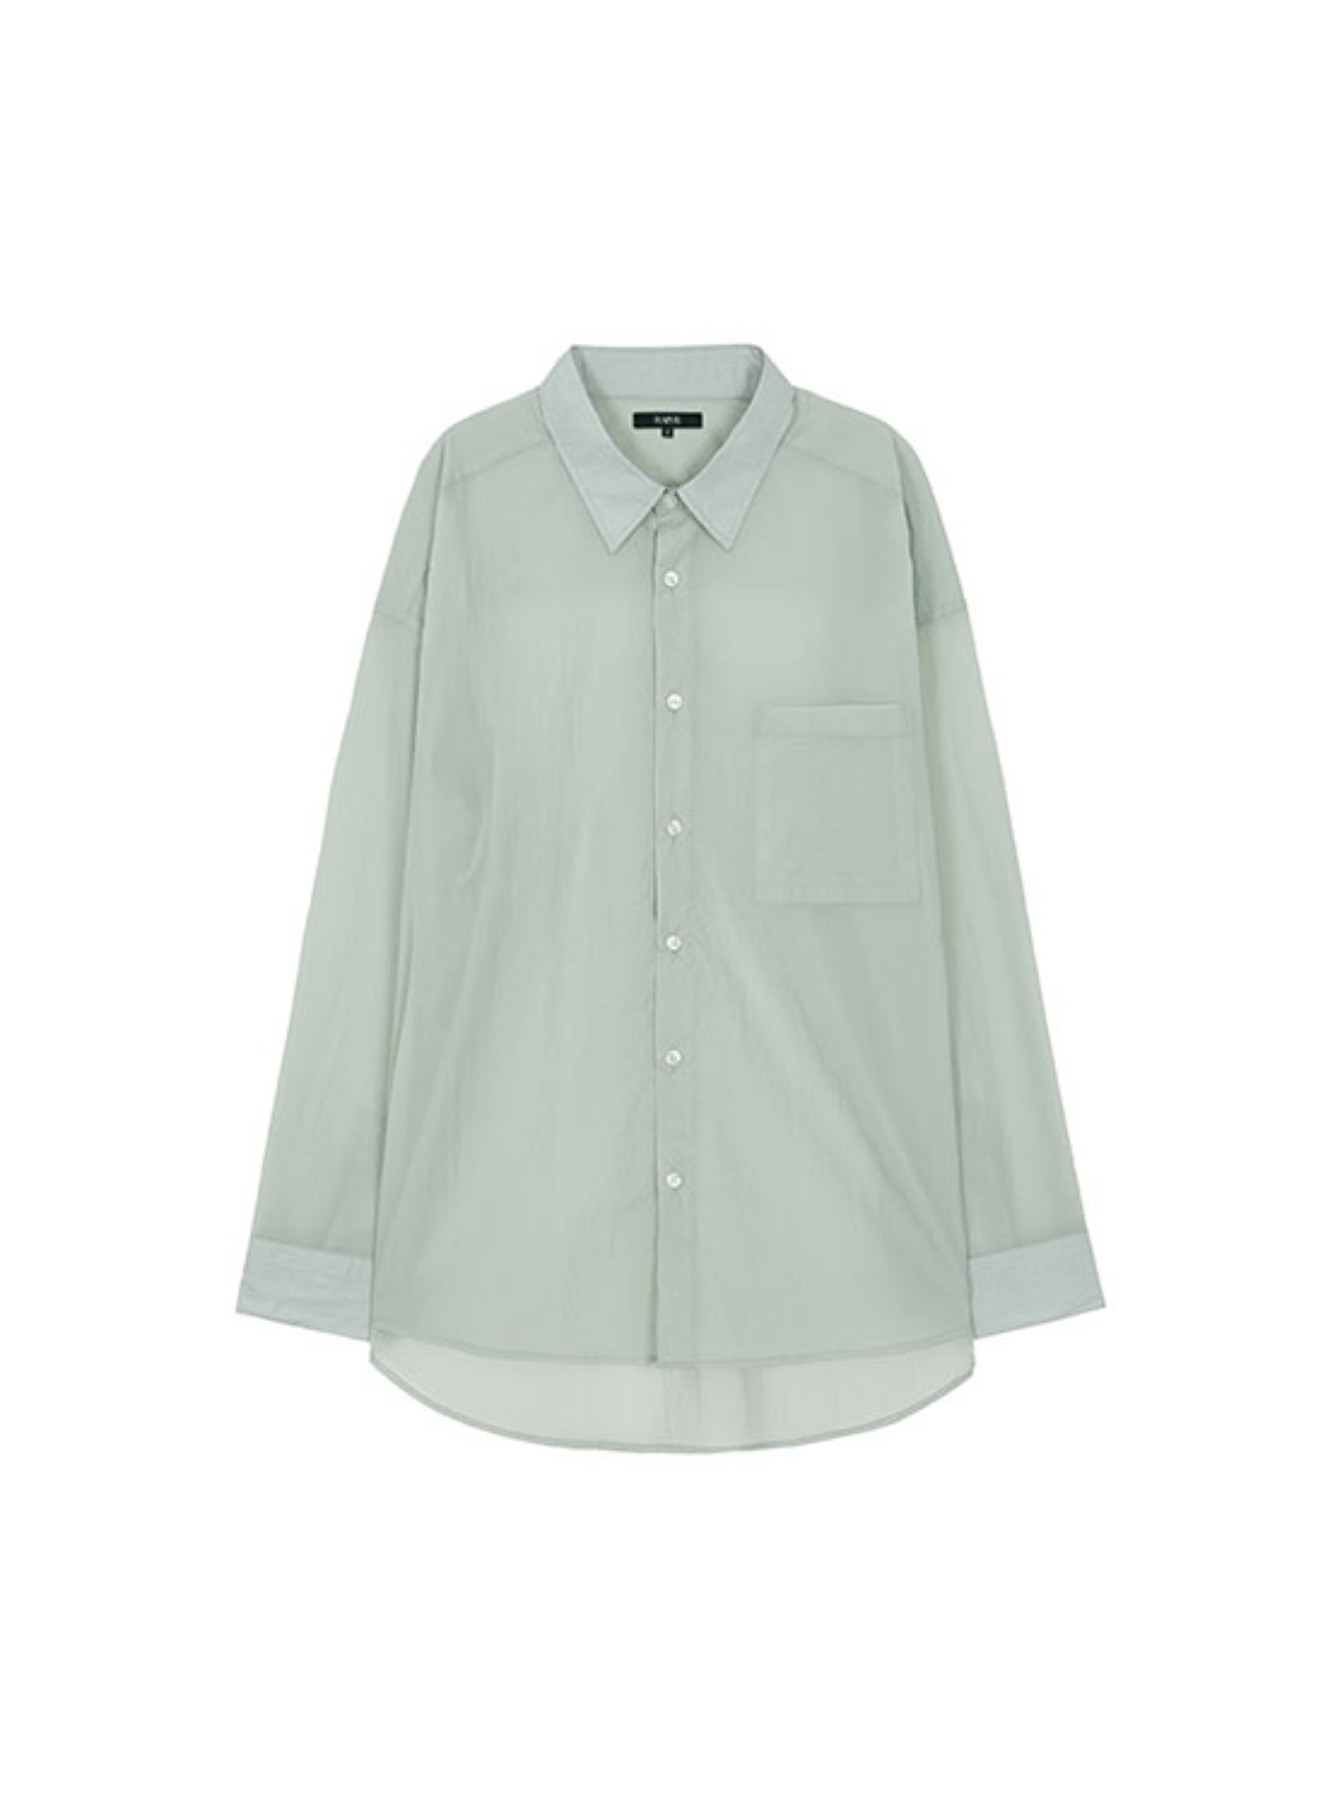 See through Basic Shirt in Mint VW2MB156-31